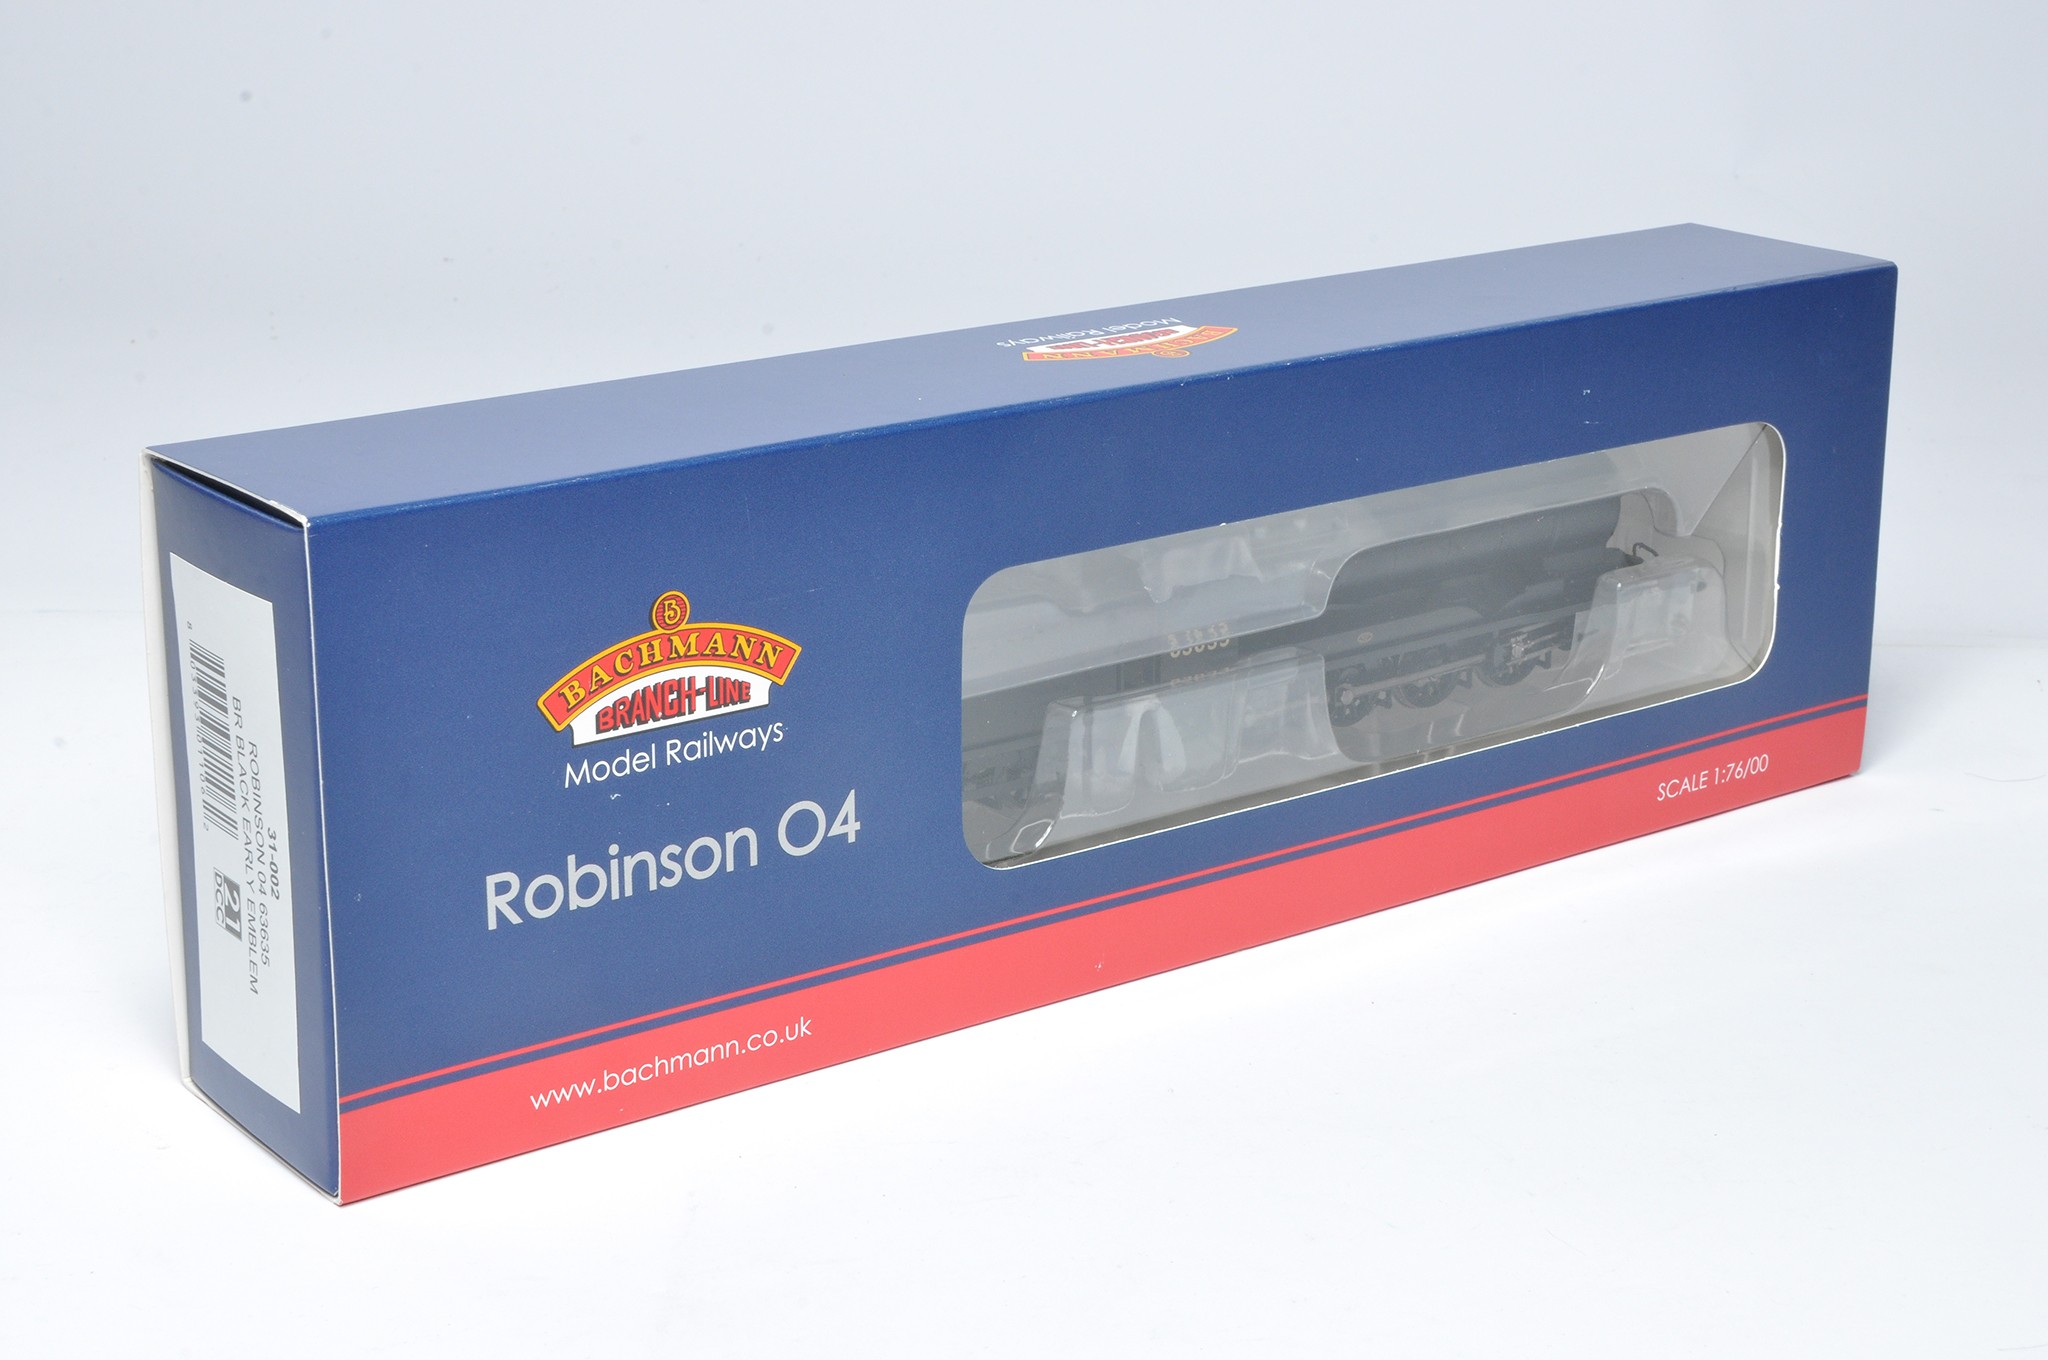 Bachmann Model Railway comprising locomotive issue No. 31-002 Robinson 04 63635. Looks to be without